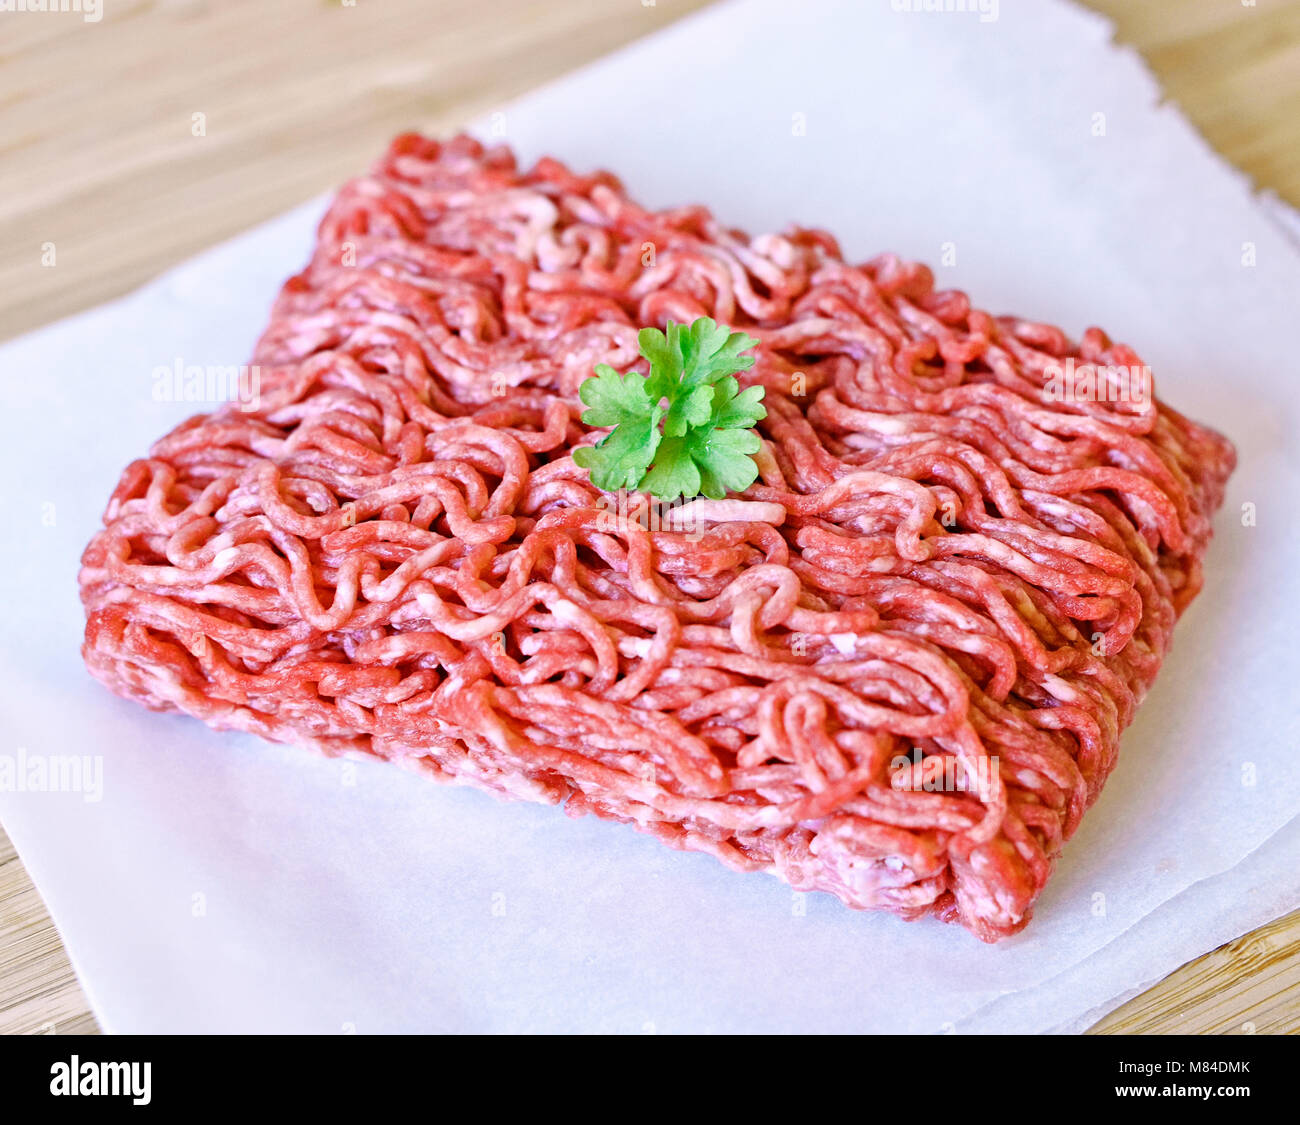 Raw minced meat or beef meat on a wooden cutting board. Fresh meat, cooking ingredient. high angle view. Stock Photo